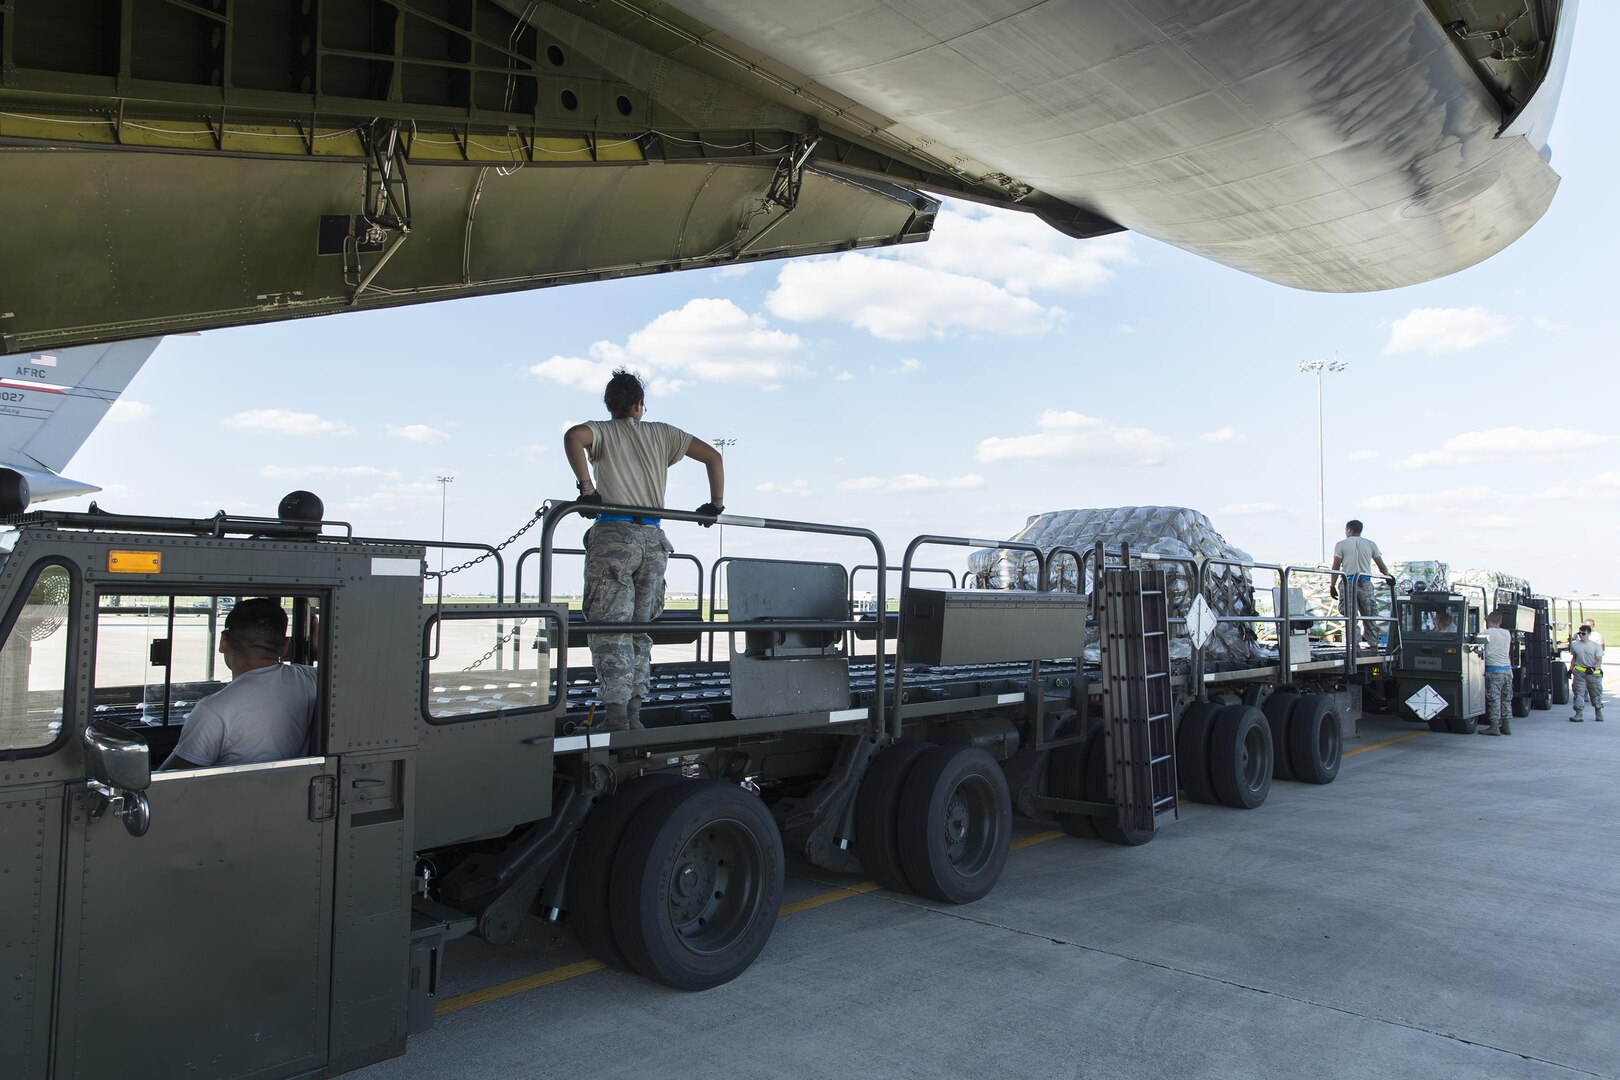 U.S. Air Force Personnel with 502nd Logistics Readiness Squadron load supplies and equipment on a military aircraft